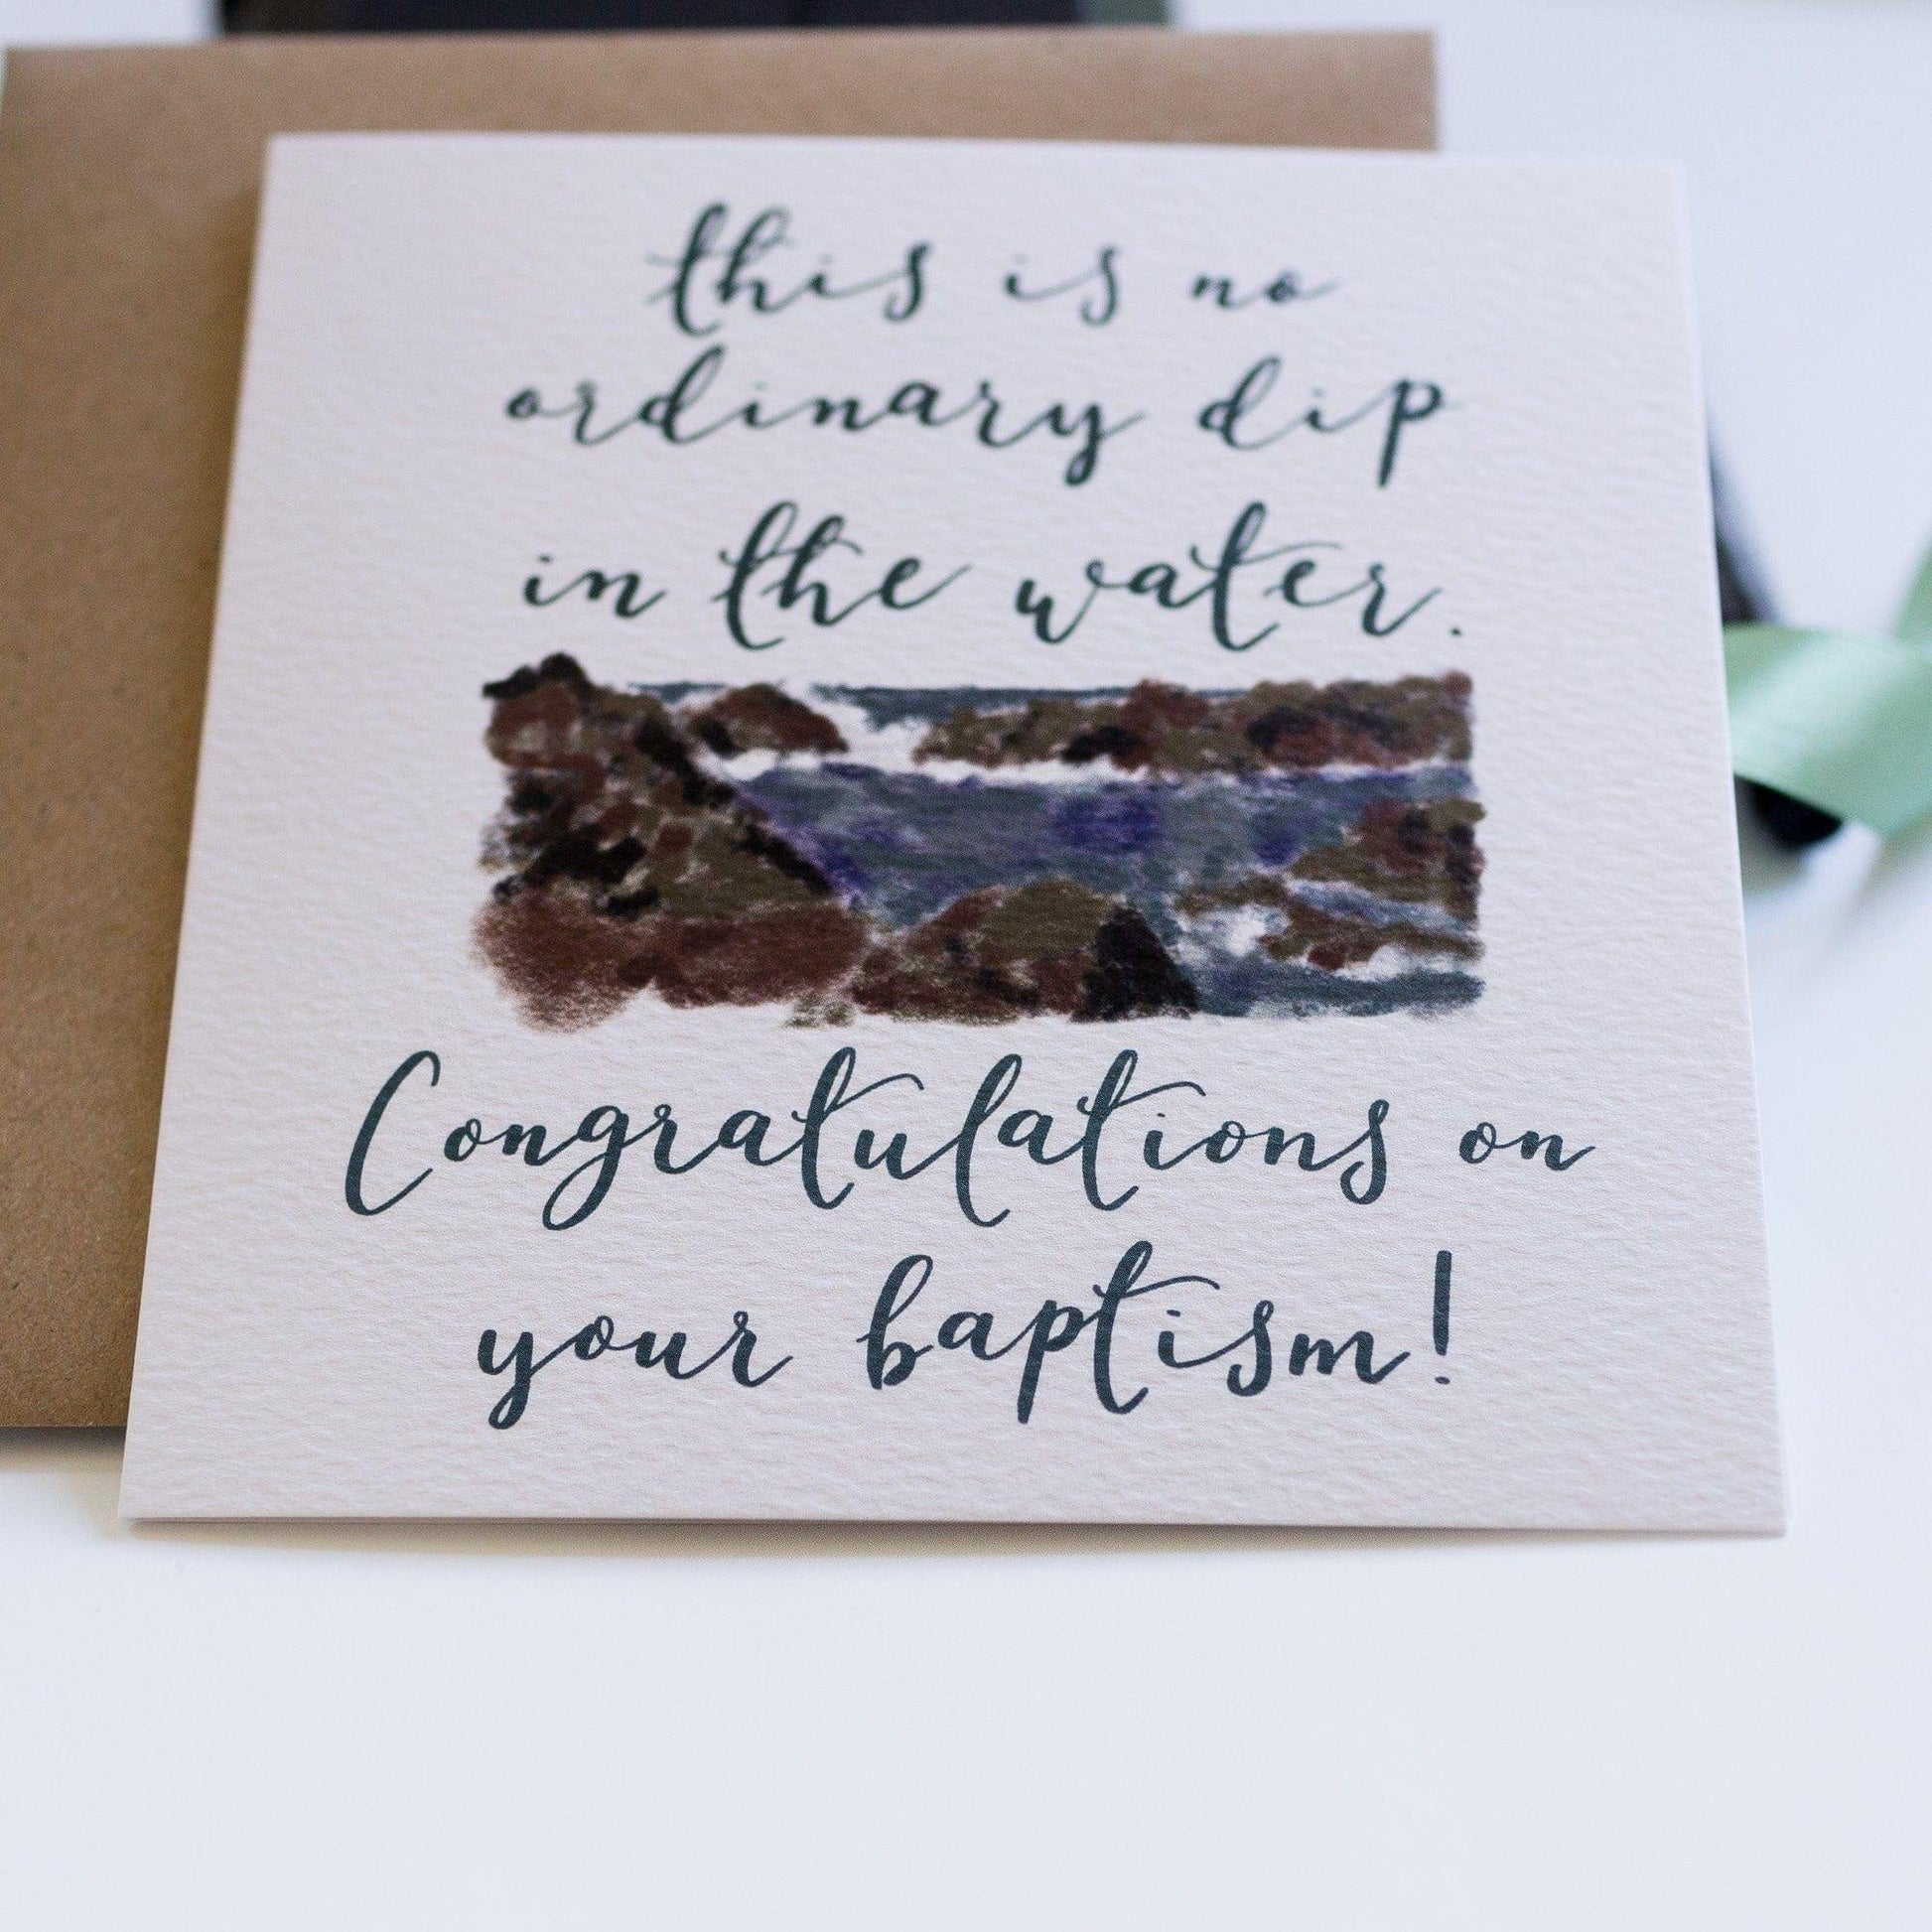 “No ordinary dip in the water” baptism card Cards And Hope Designs   